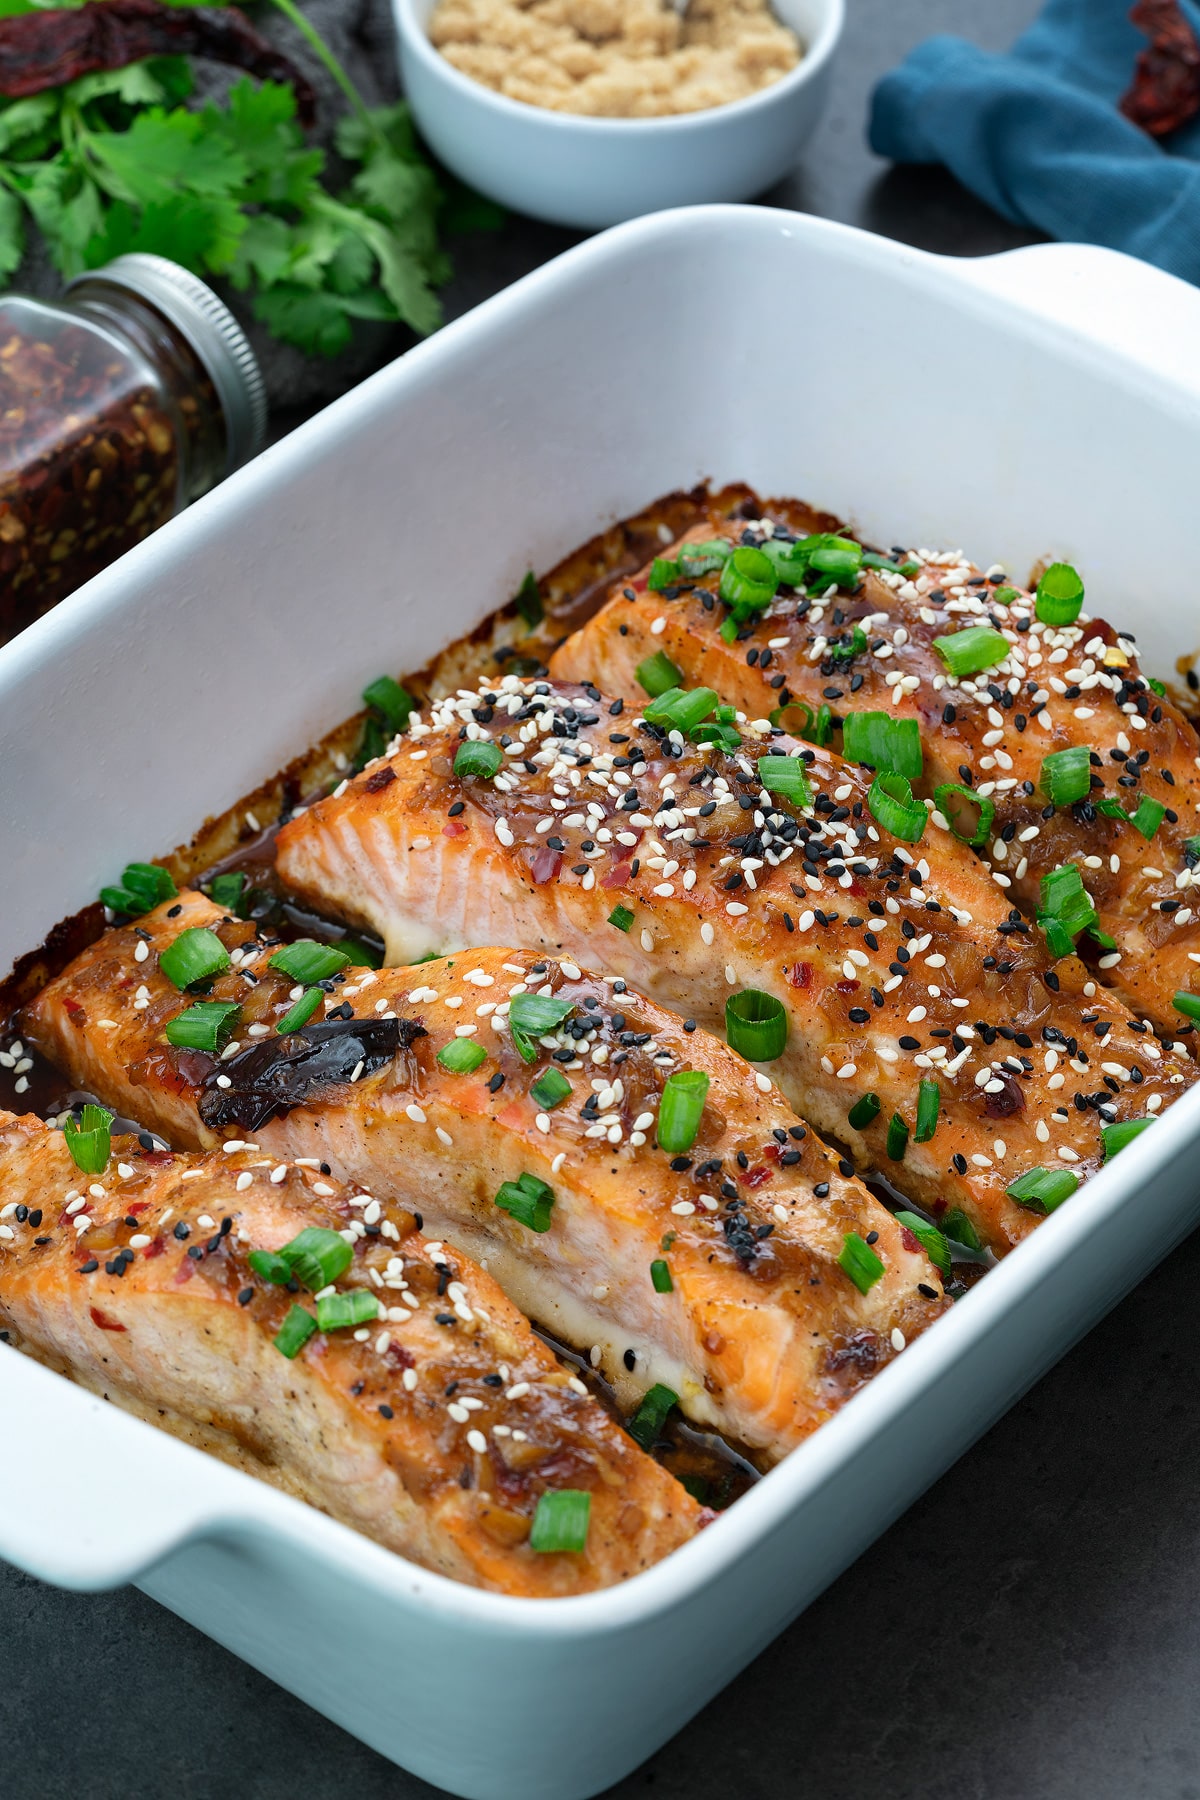 Teriyaki Salmon fillets in a ceramic baking tray with few ingredients around.